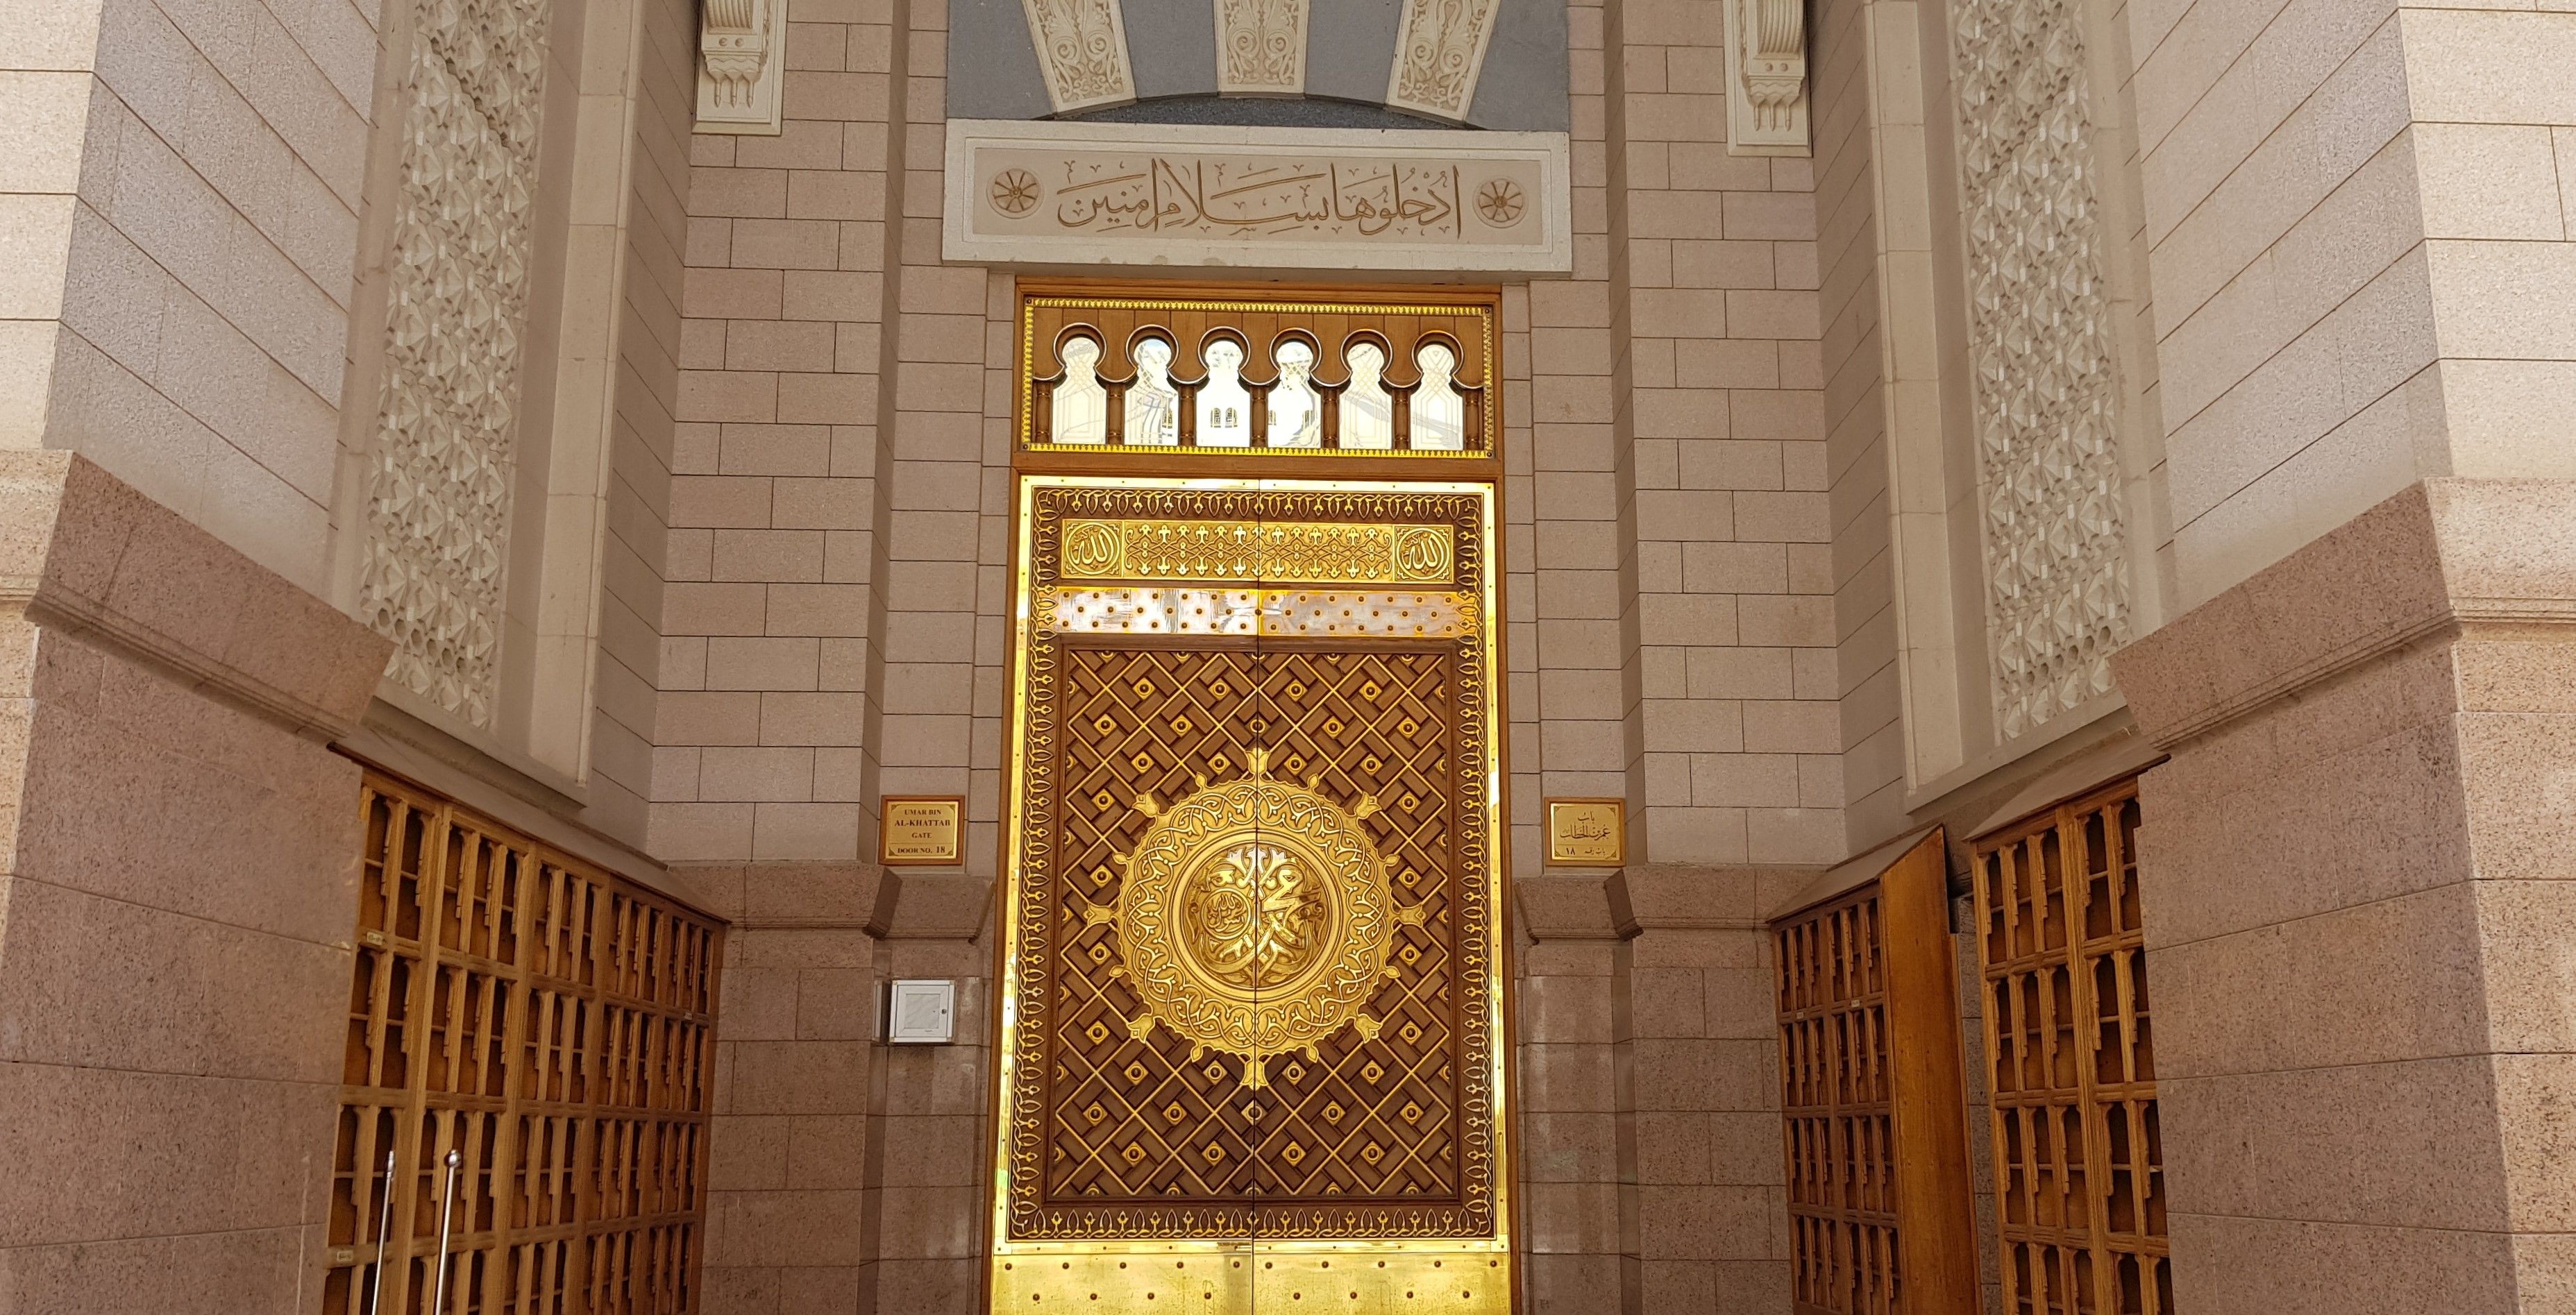 All the doors of Masjid Nabawi to be thrown open during Ramadan